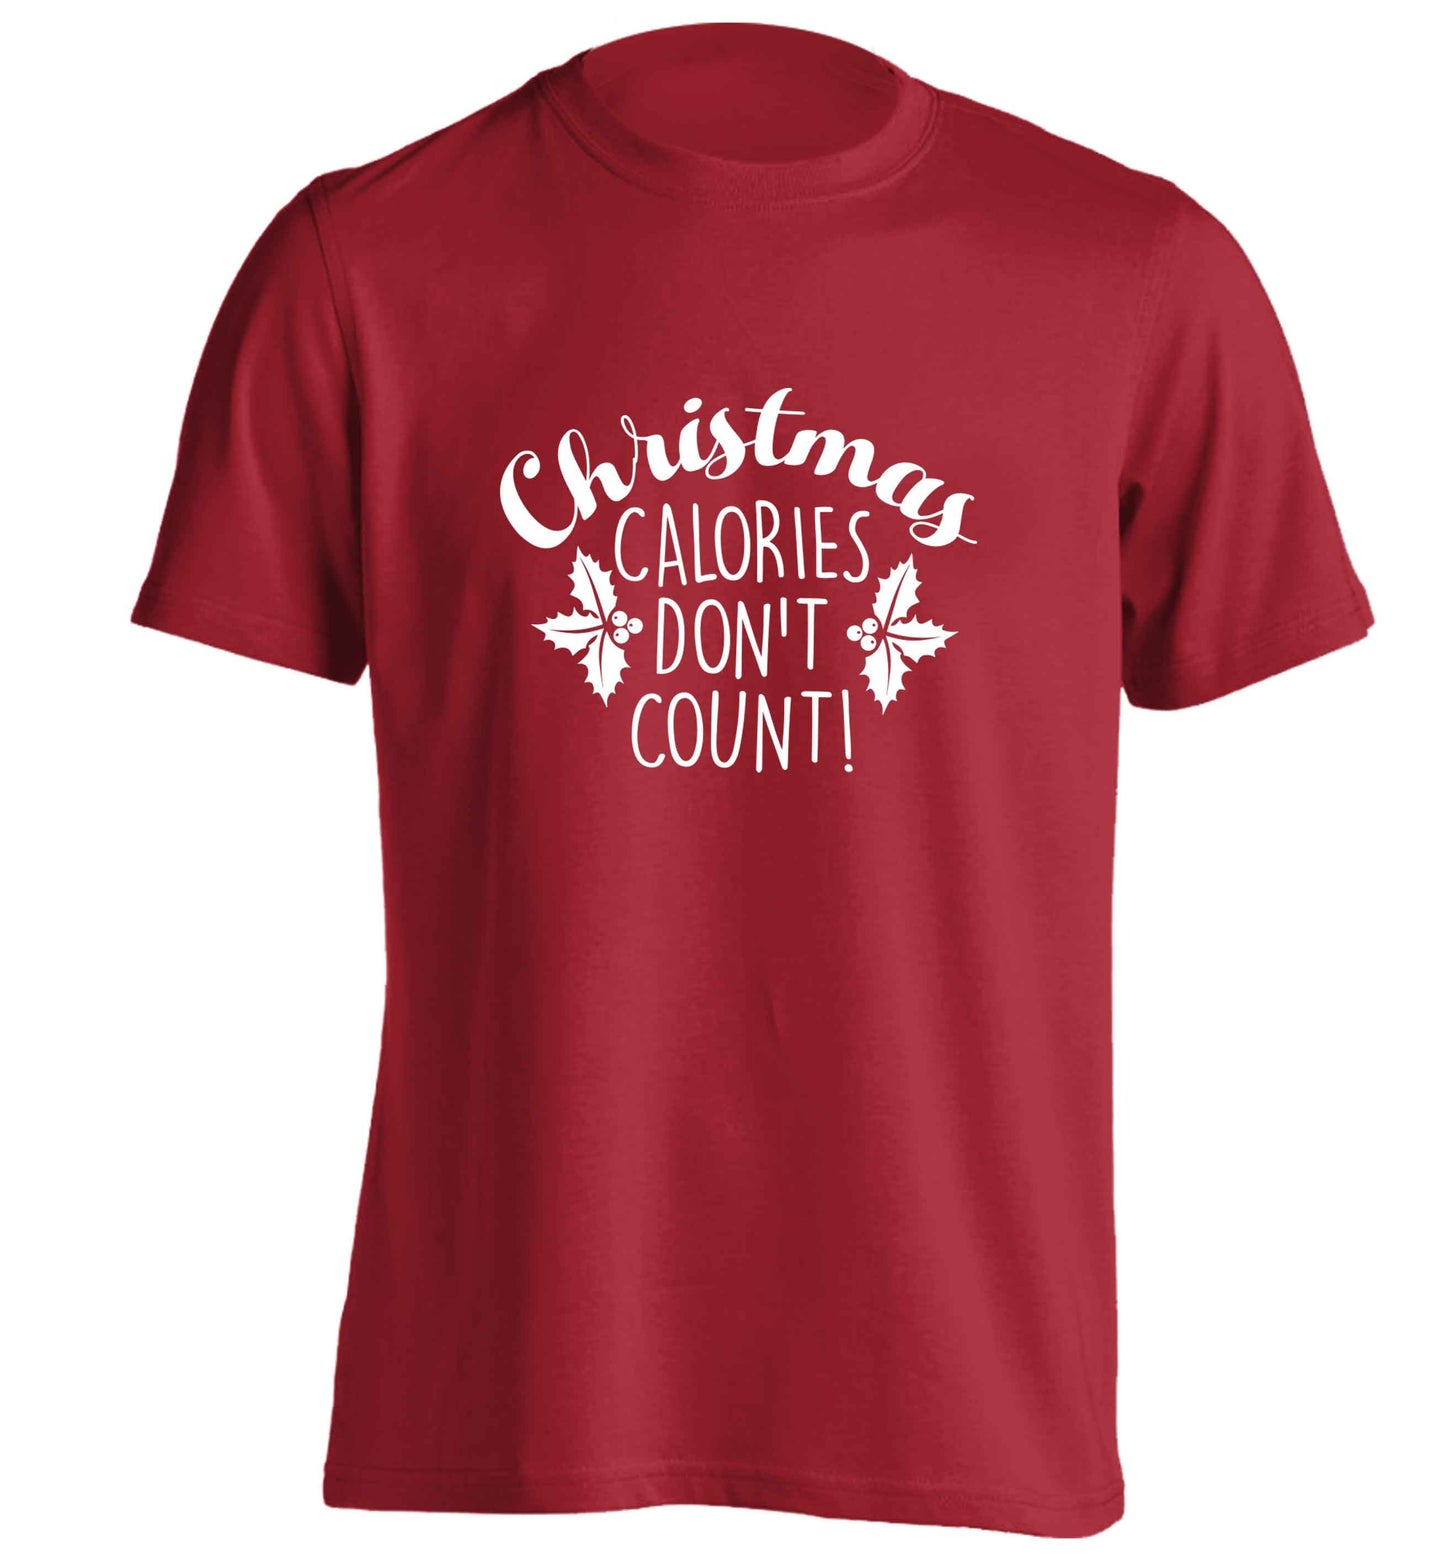 Christmas calories don't count adults unisex red Tshirt 2XL